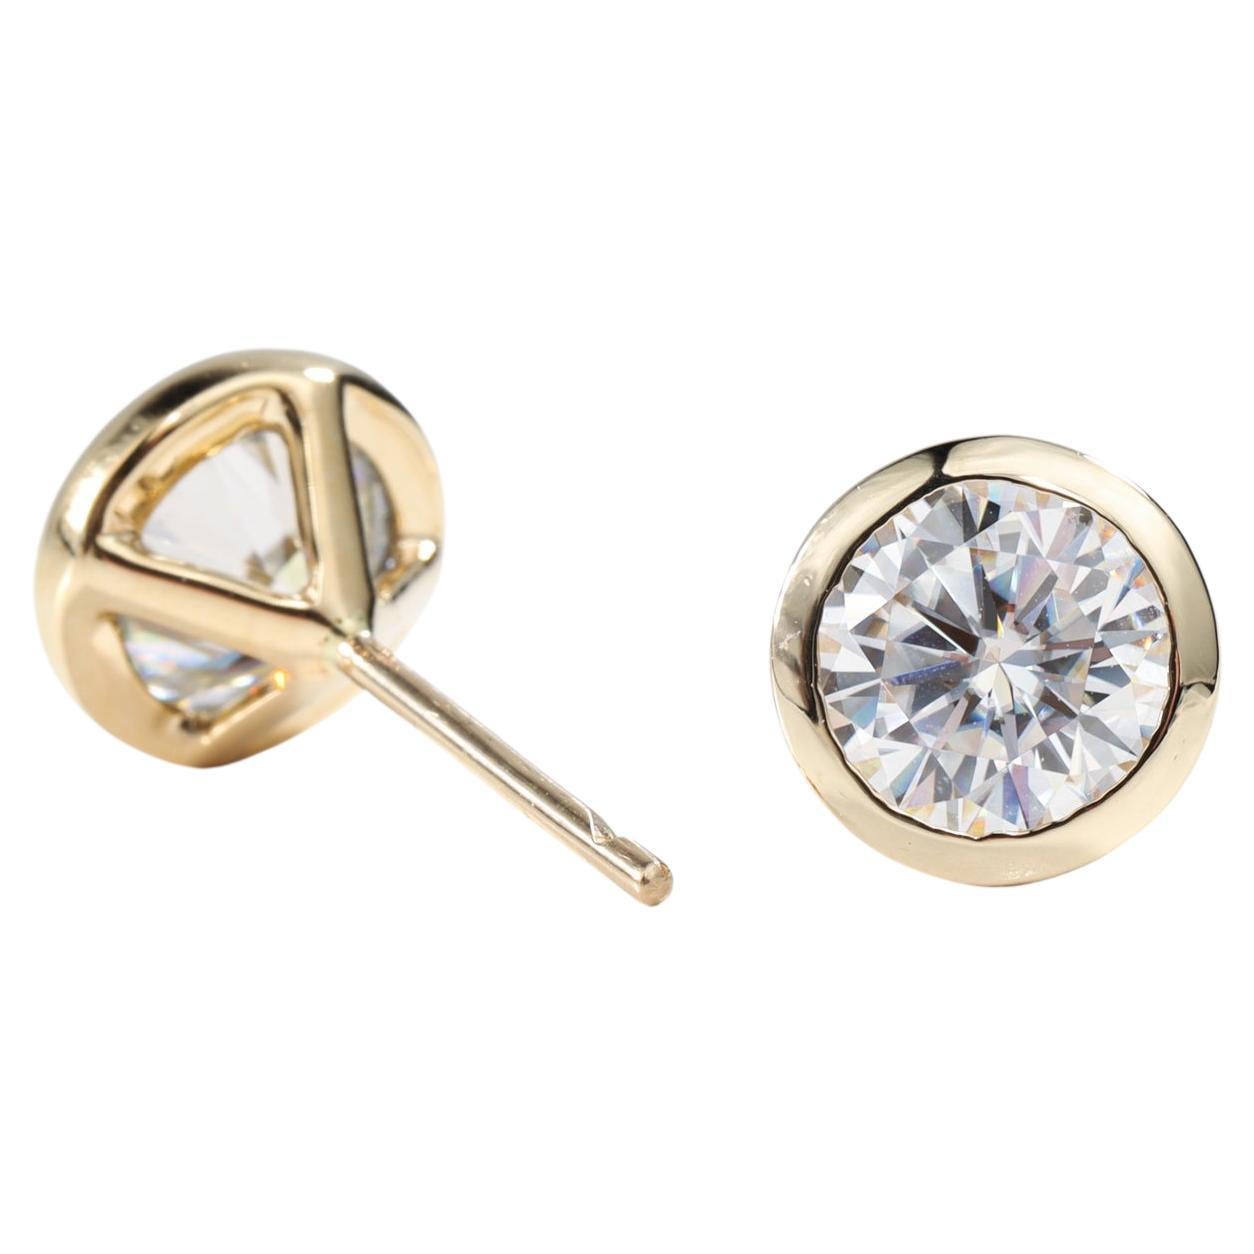 GIA Report Certified D IF 4 TCW Diamond Round Cut Stud Earrings (boucles d'oreilles à taille ronde) 